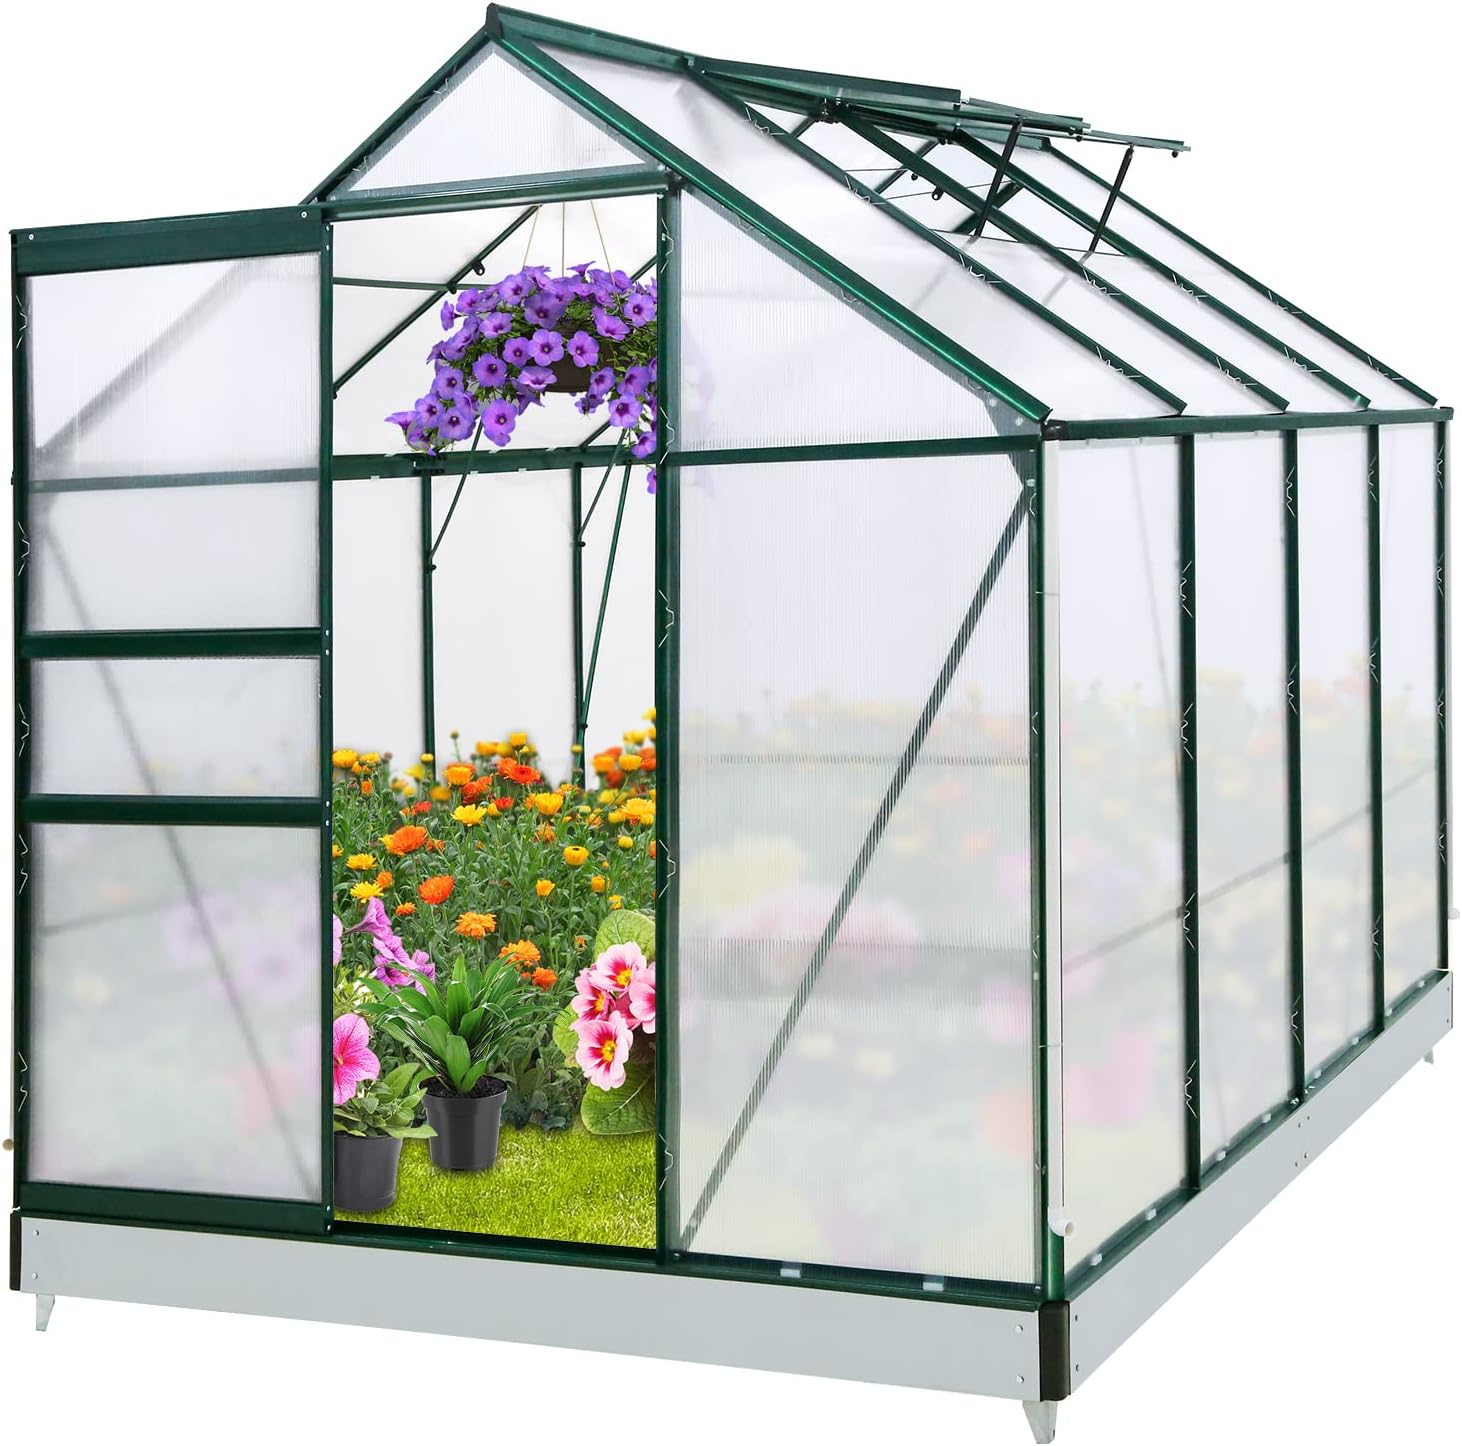 EAGLE PEAK 6x8x7 Outdoor Walk-in Hobby Greenhouse with Adjustable Roof Vent and Rain Gutter, Base and Anchor, Polycarbonate Alum